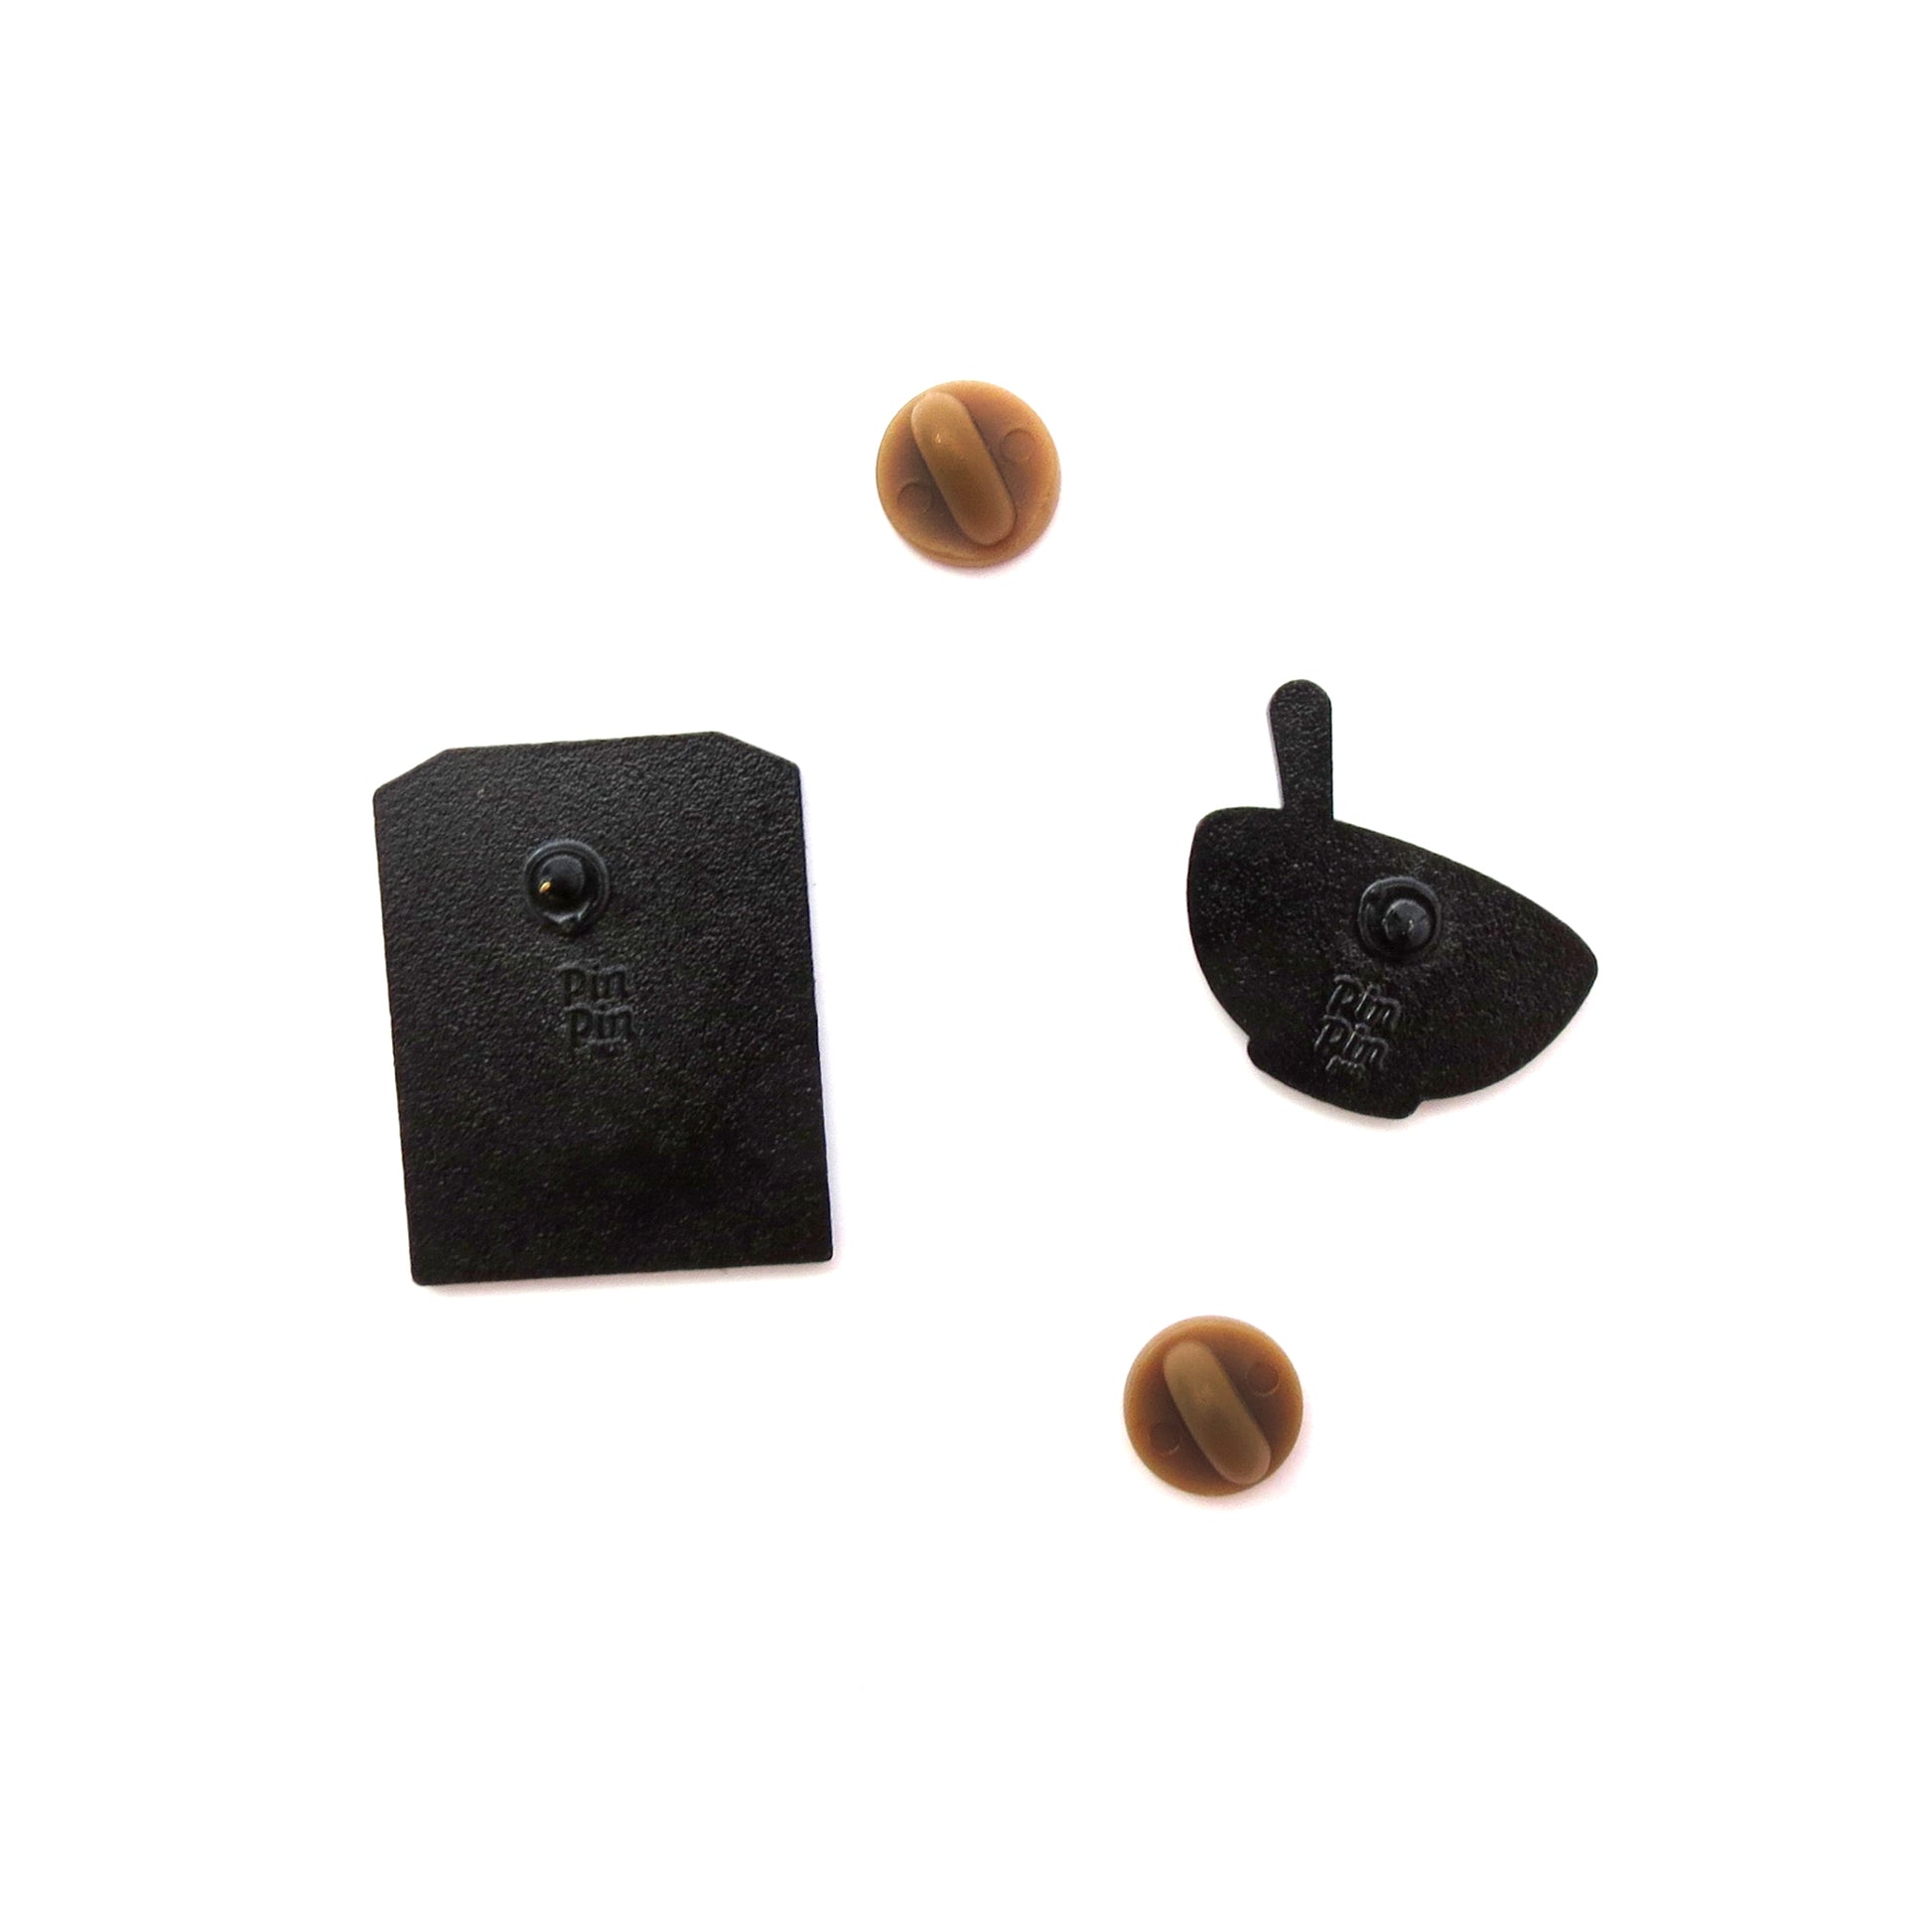 Backs of Cocoa Cereal Box and Cereal Bowl enamel pins with brown rubber backings